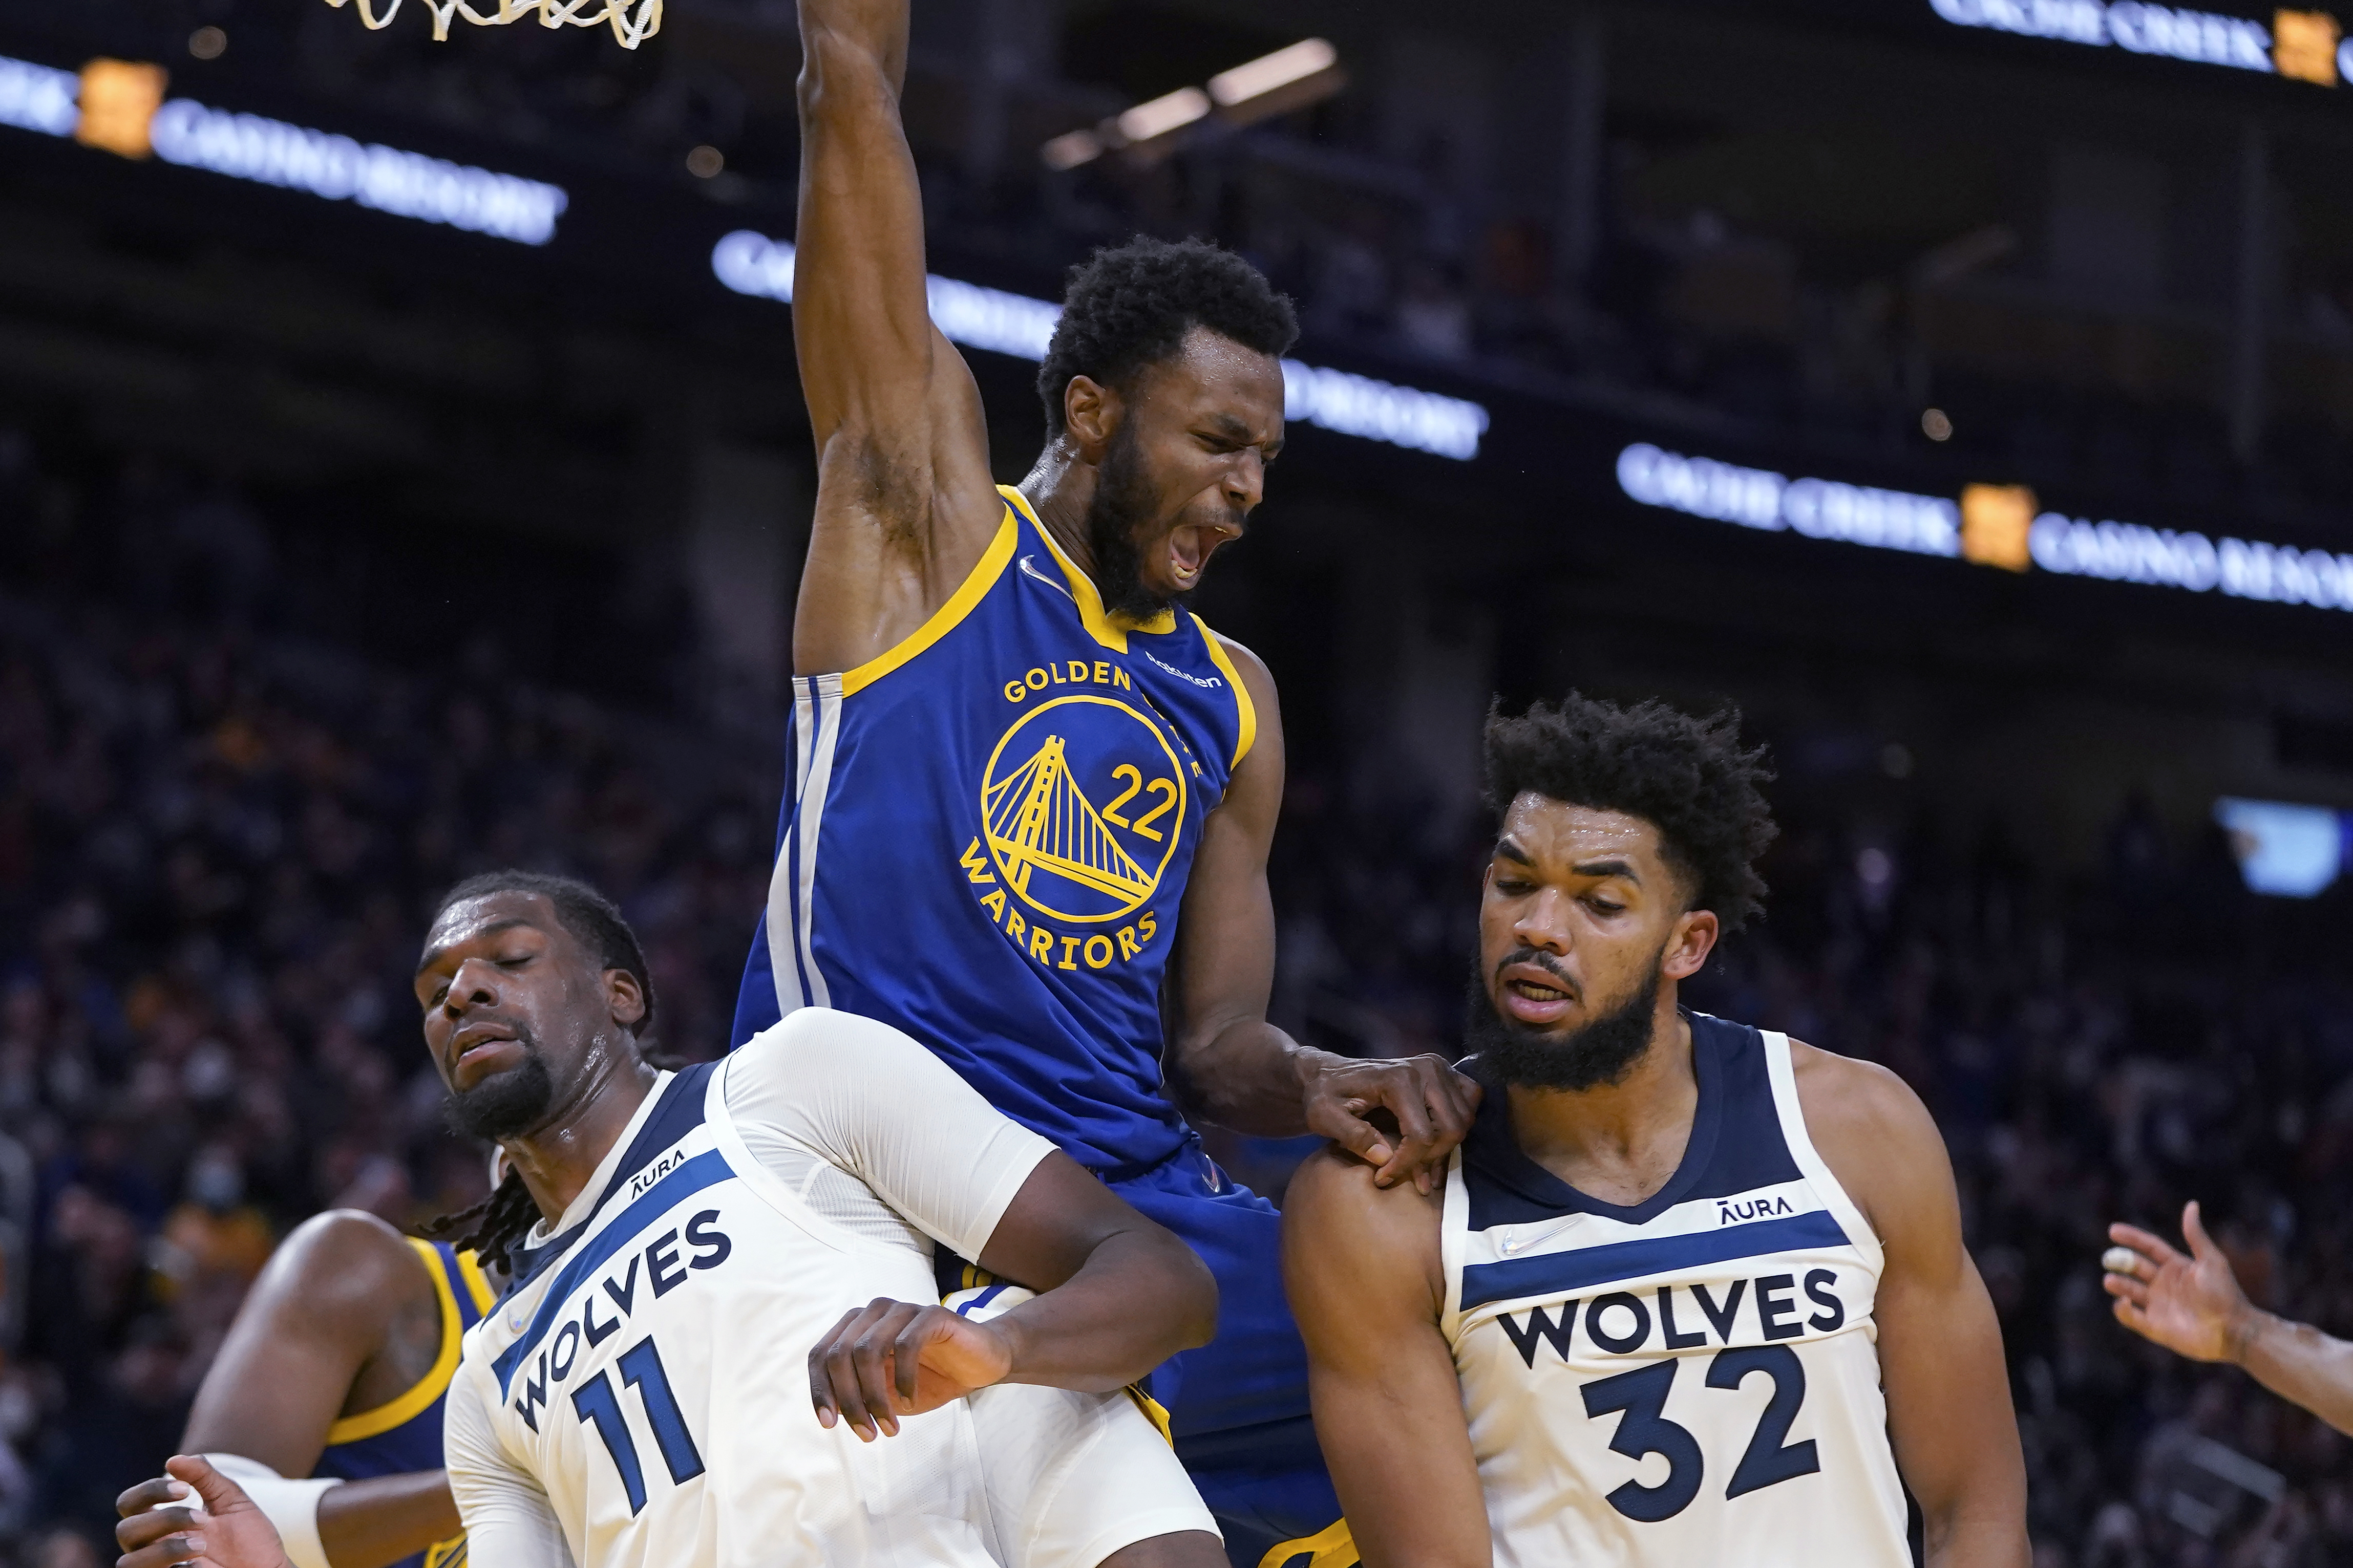 Andrew Wiggins pours in 41 points but Wolves fall in Washington